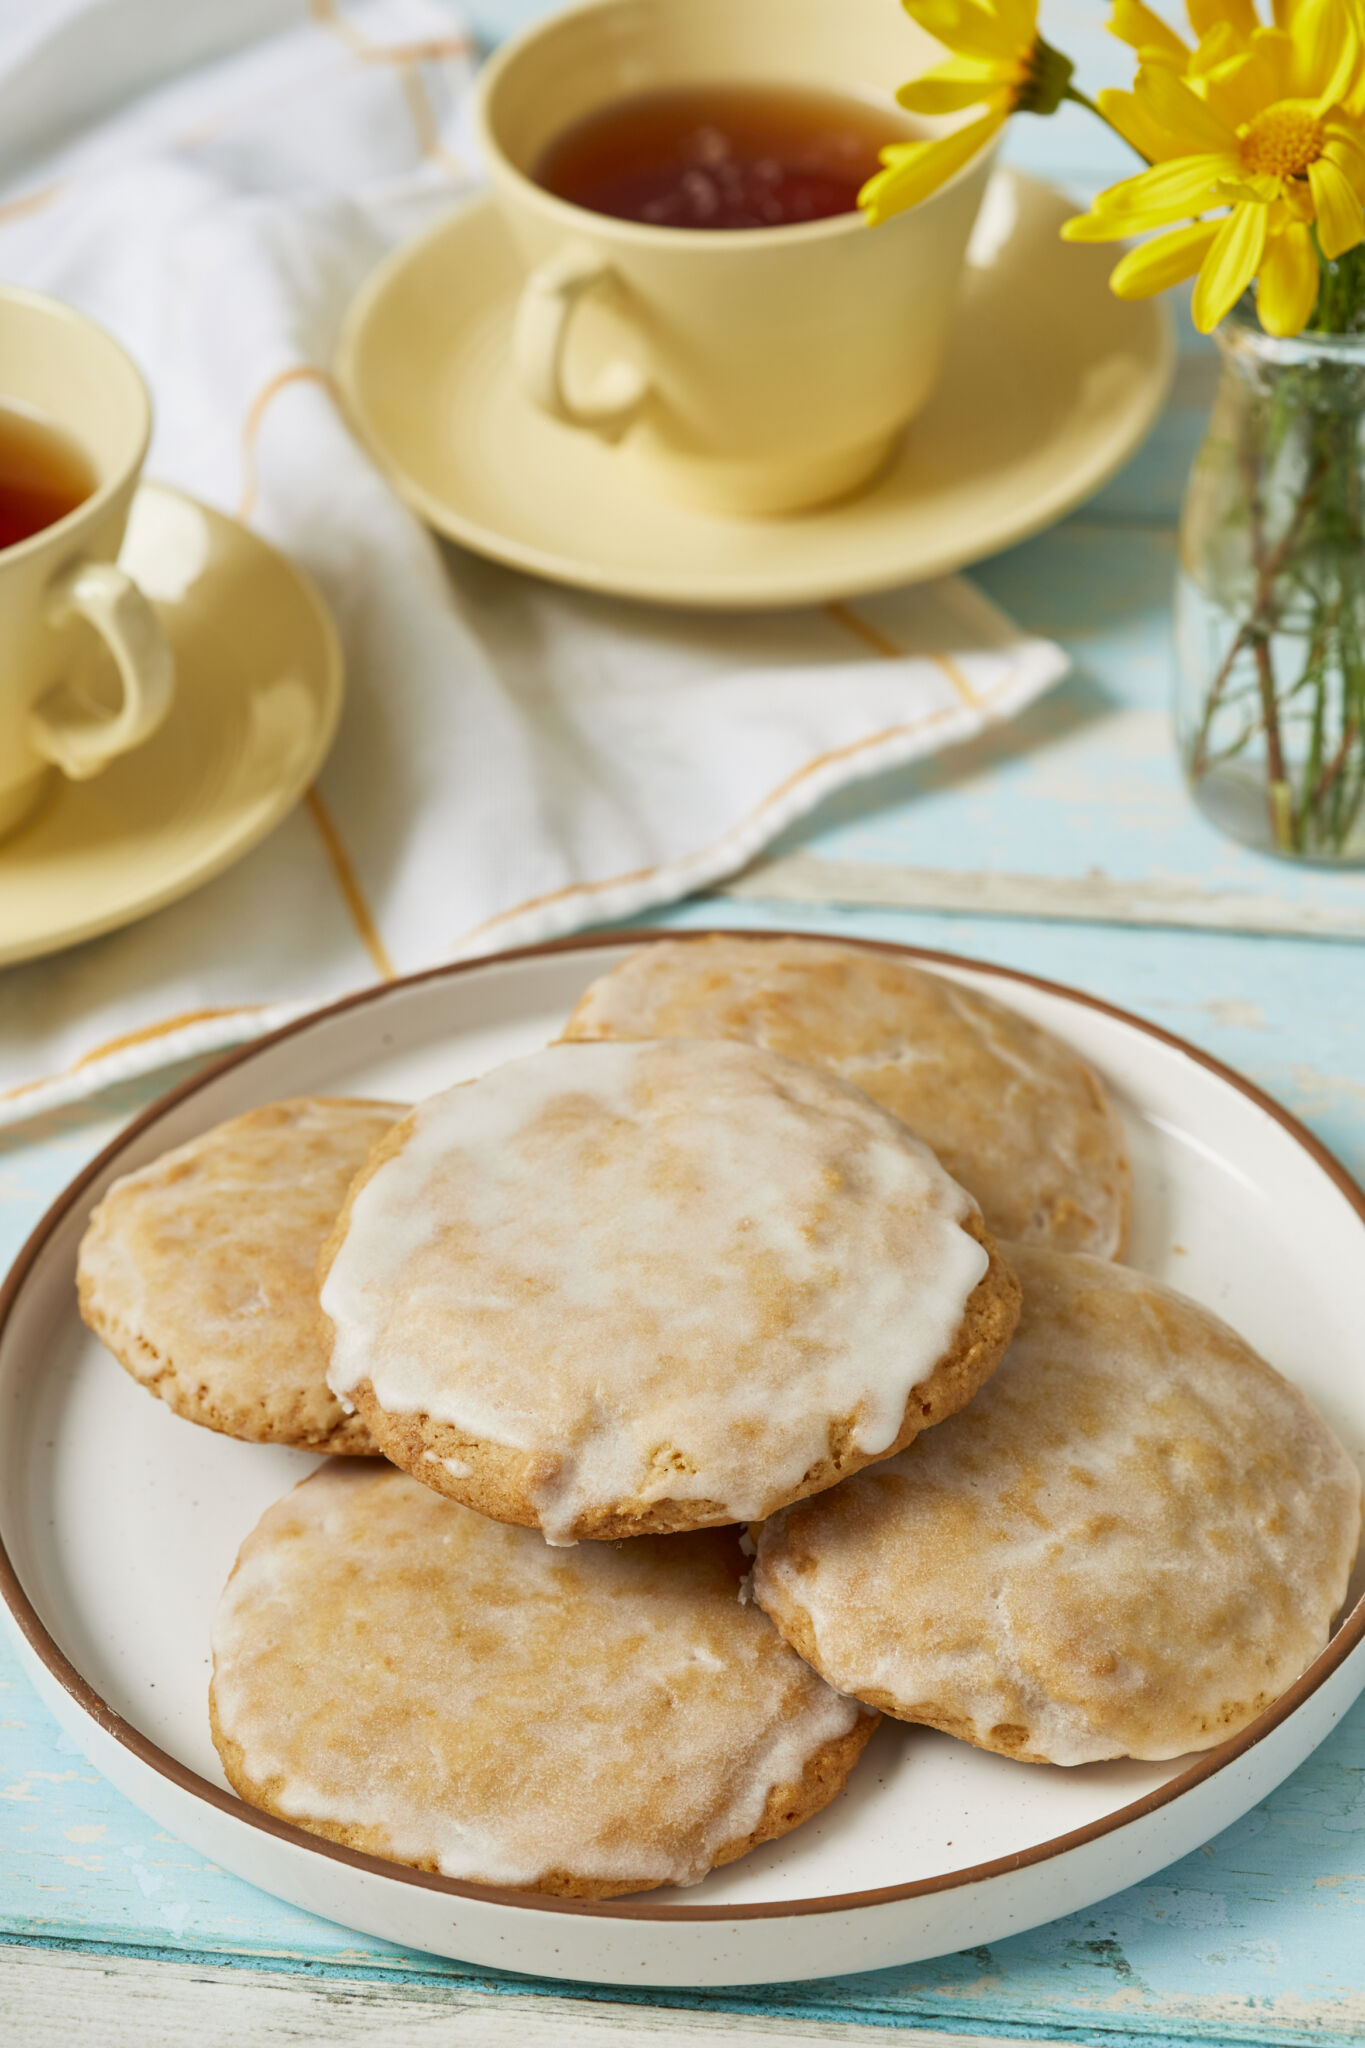 Baked Soft Lemon Cookies dipped with Zesty Lemon Glaze, served on a plate with tea on the side. 